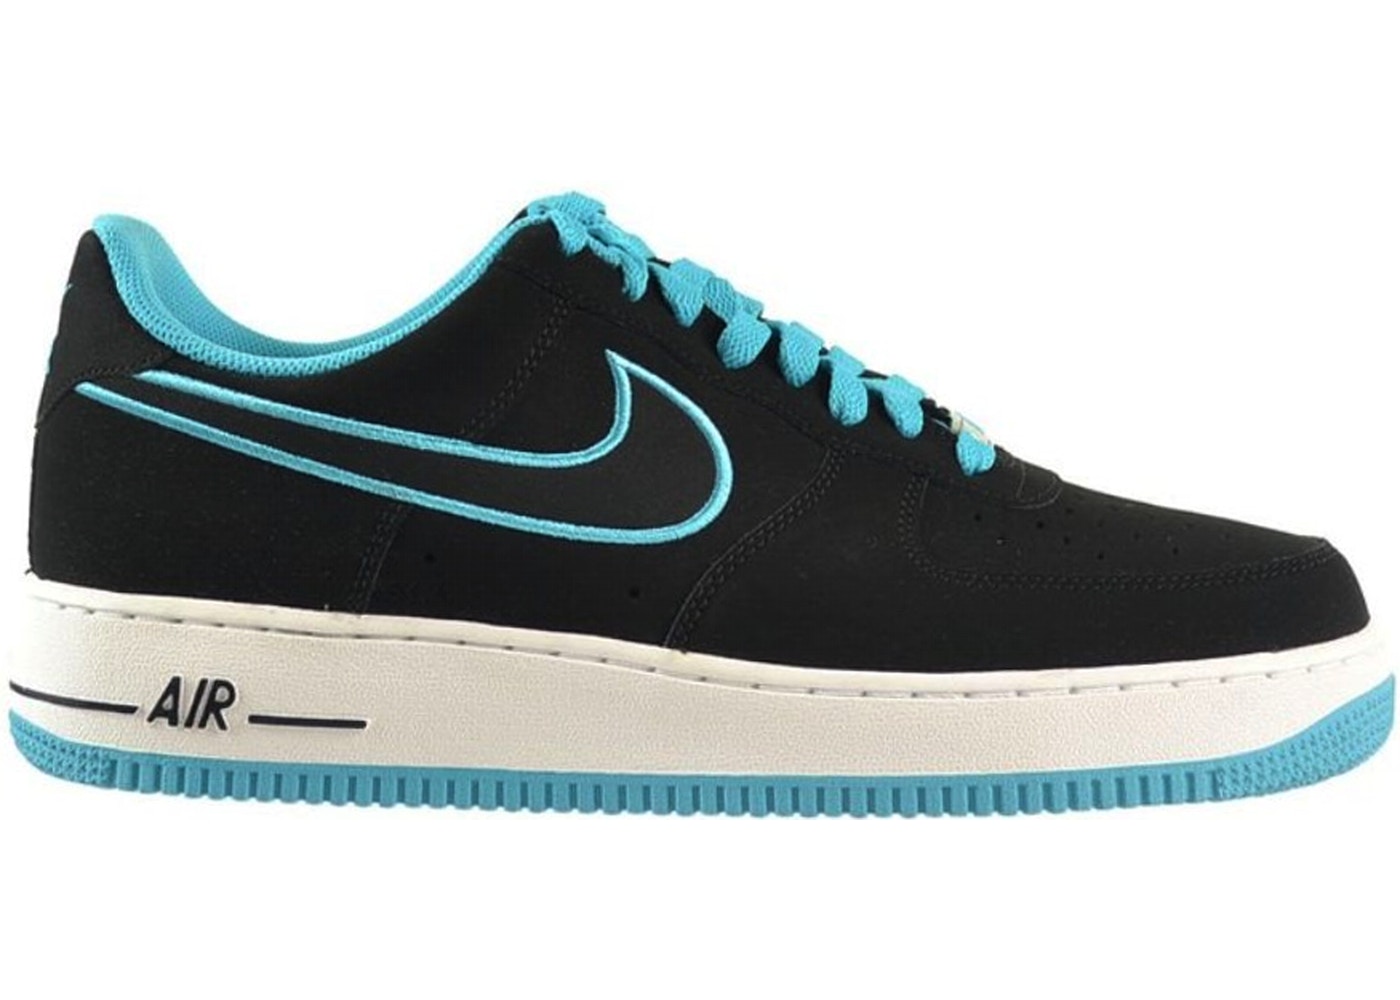 Nike Air Force 1 Low Black Turquoise - 488298-011